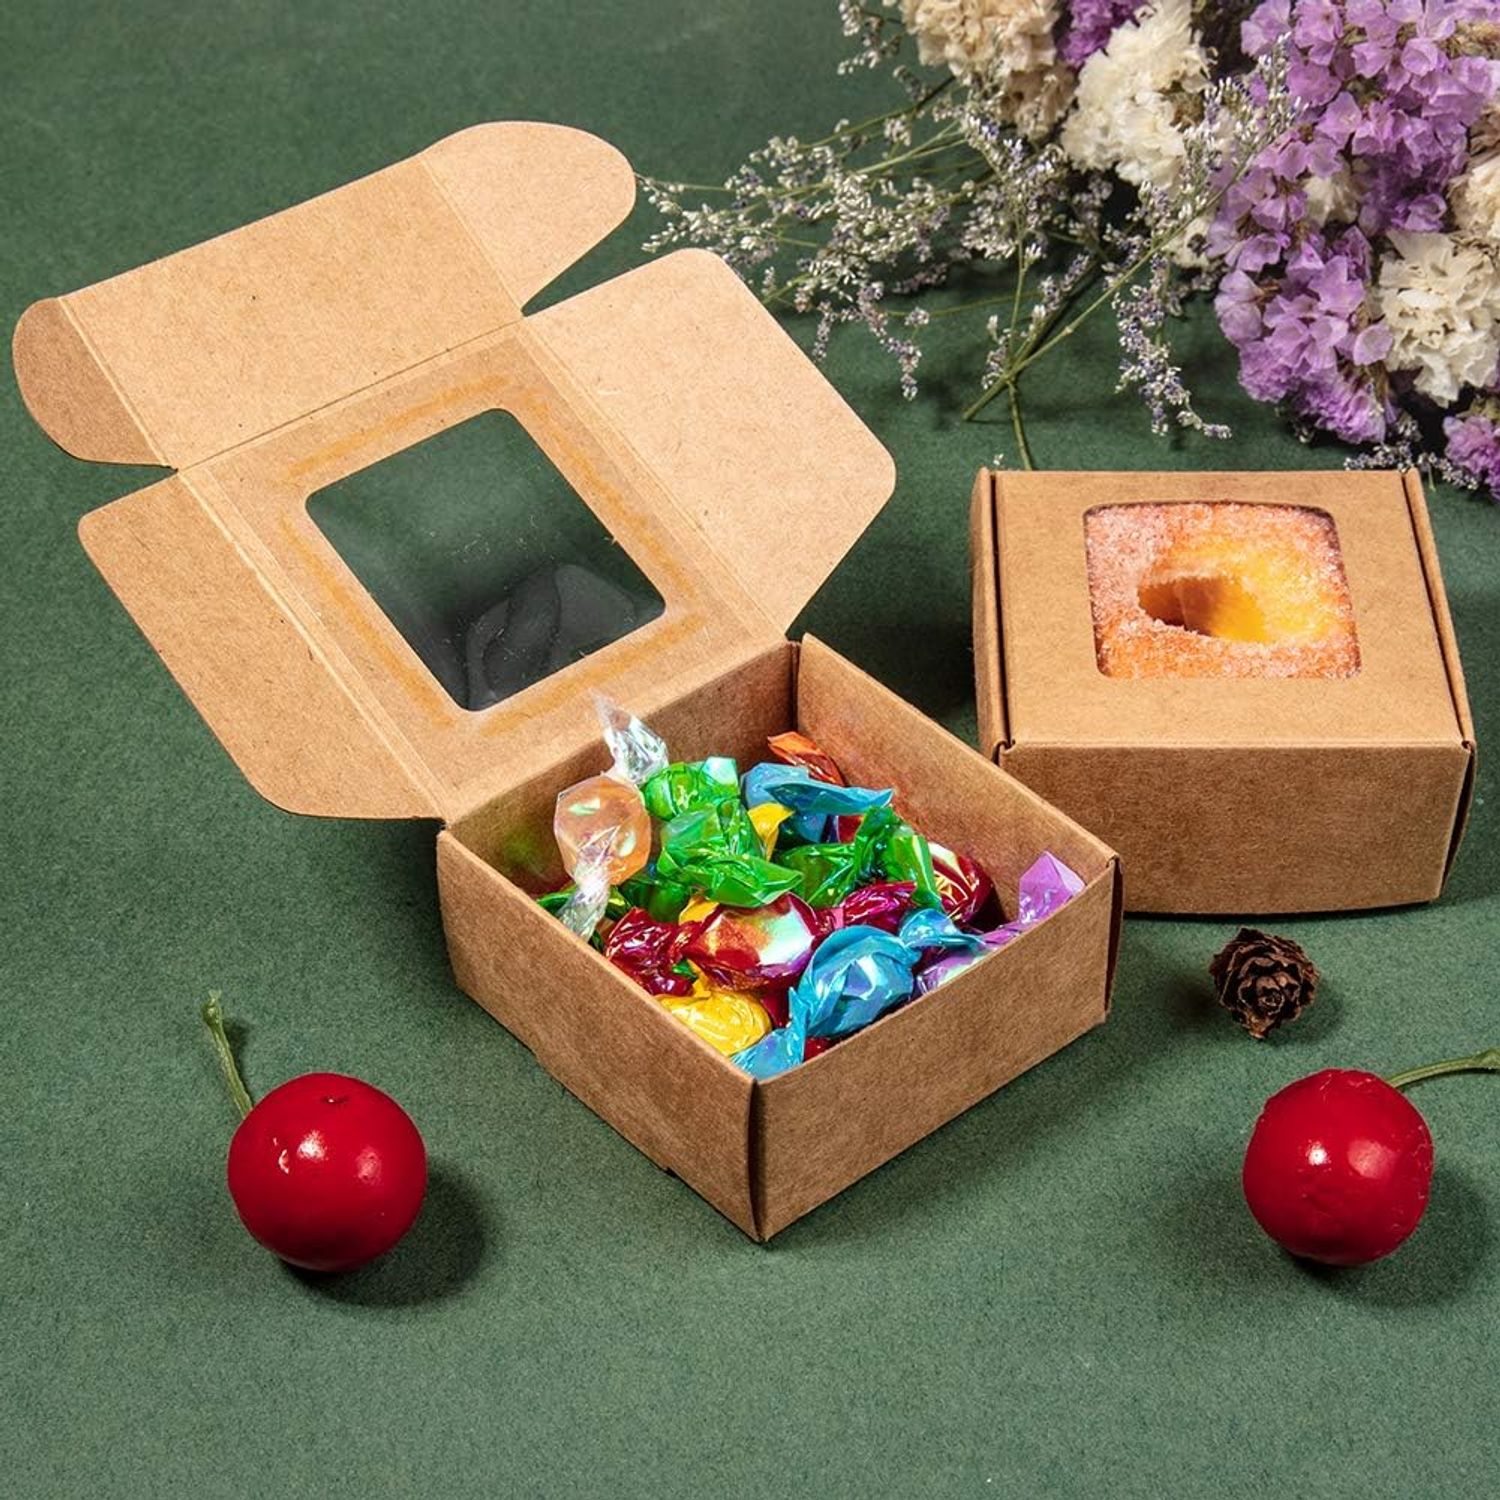 Easy To Fold Small Candy Snacks Corrugated Shipping Boxes With Clear Plastic Window